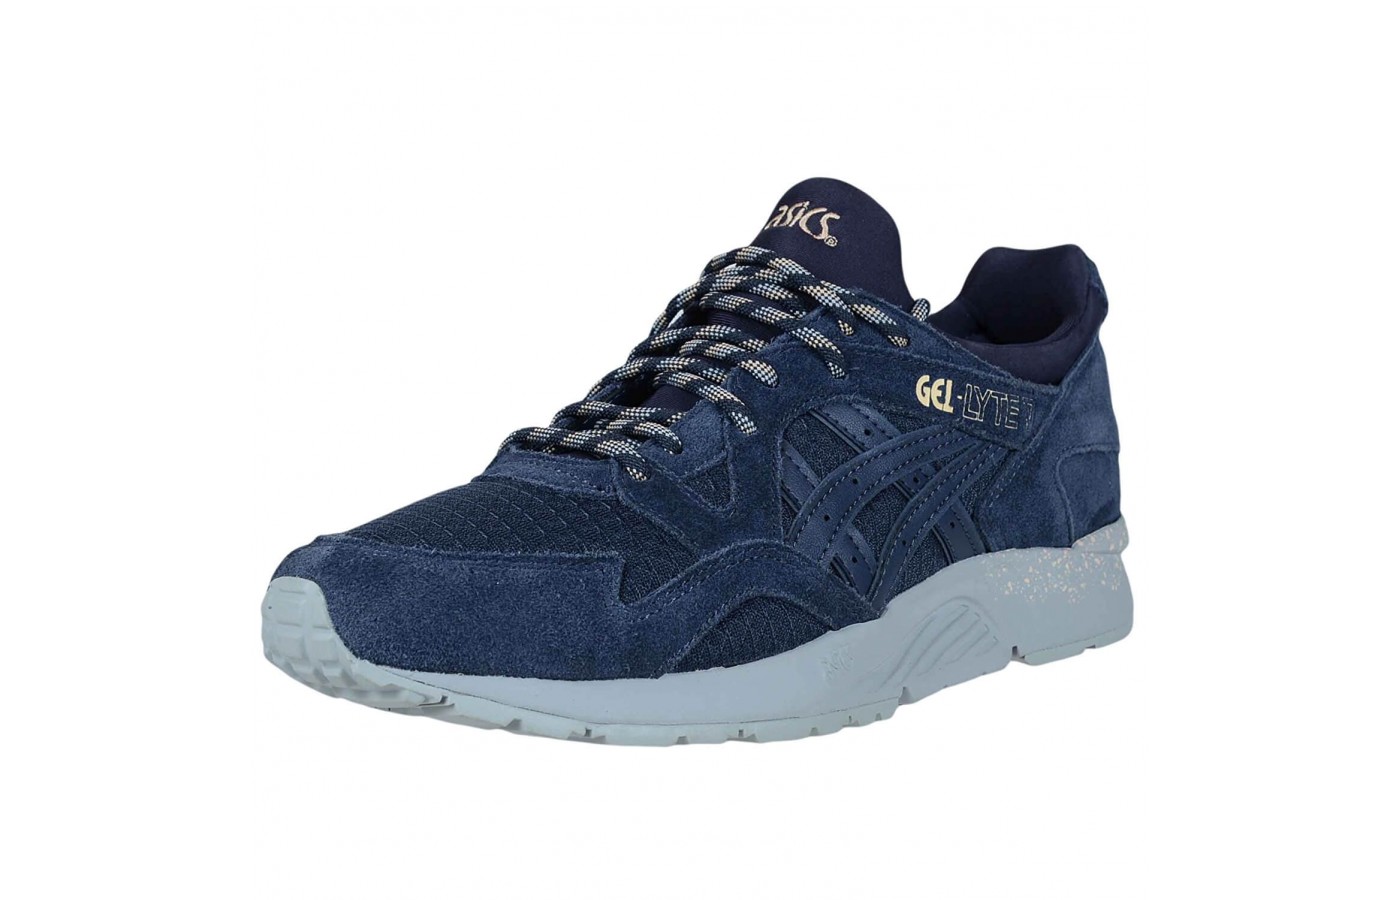 The Asics Gel Lyte V has standard laces